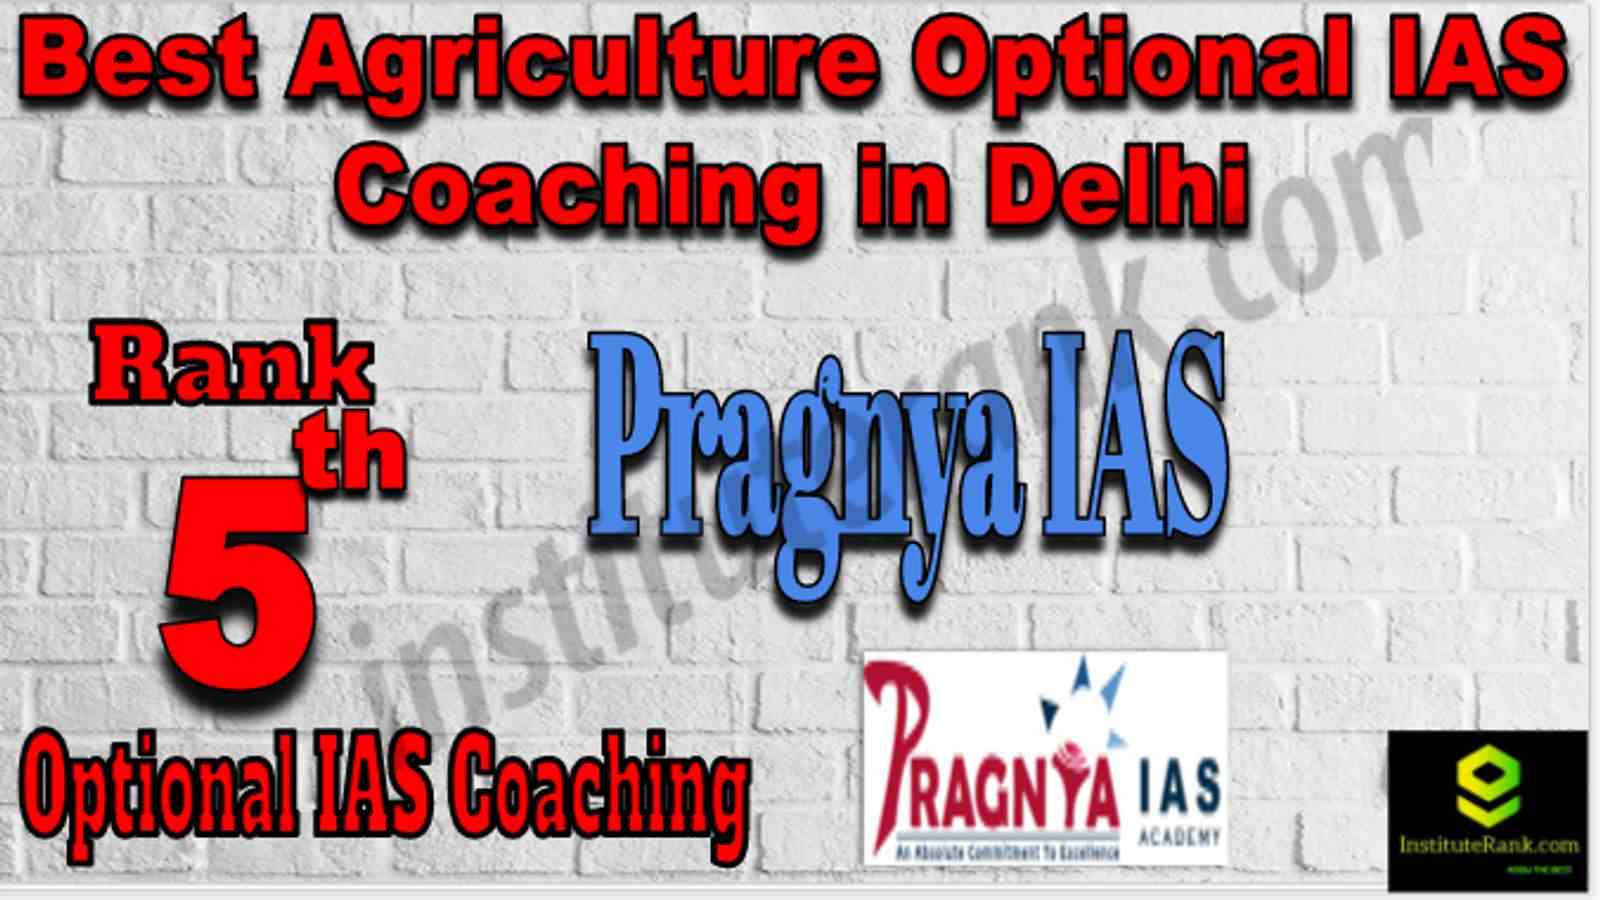 Rank 5 Best Agriculture Optional IAS Coaching in Delhi